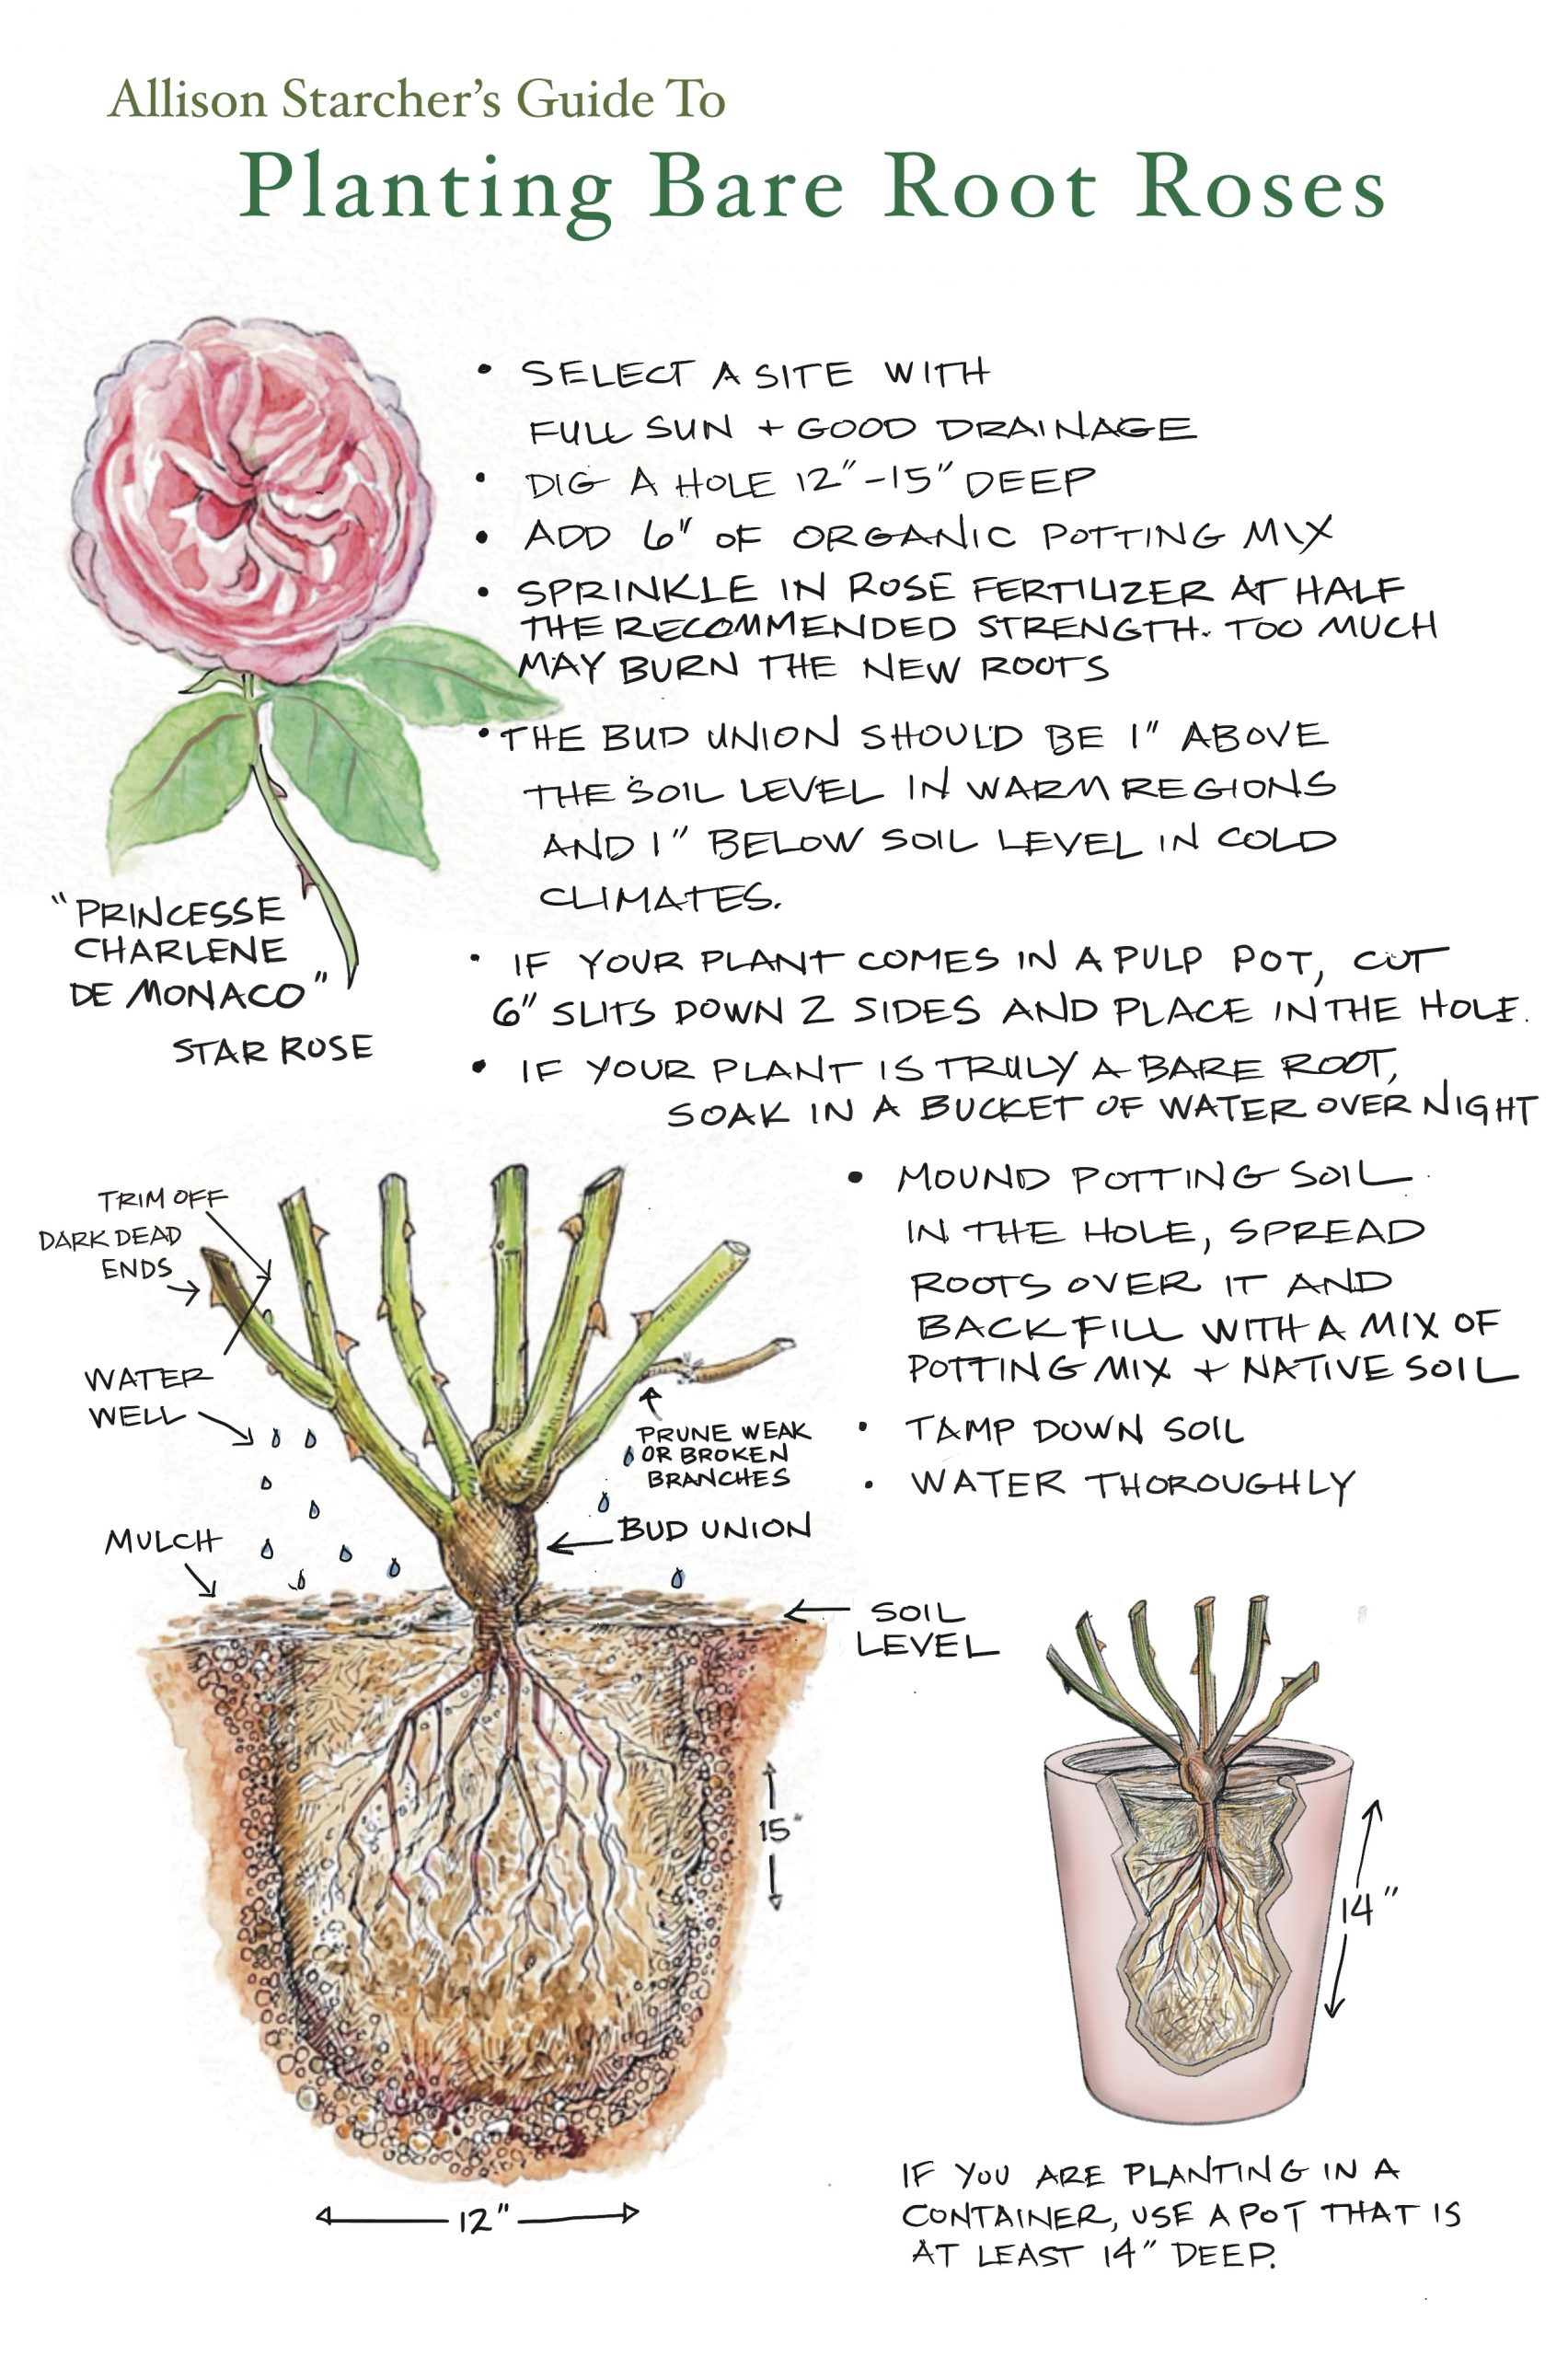 When to Plant Bare Root Roses? (How to Plant Successfully)